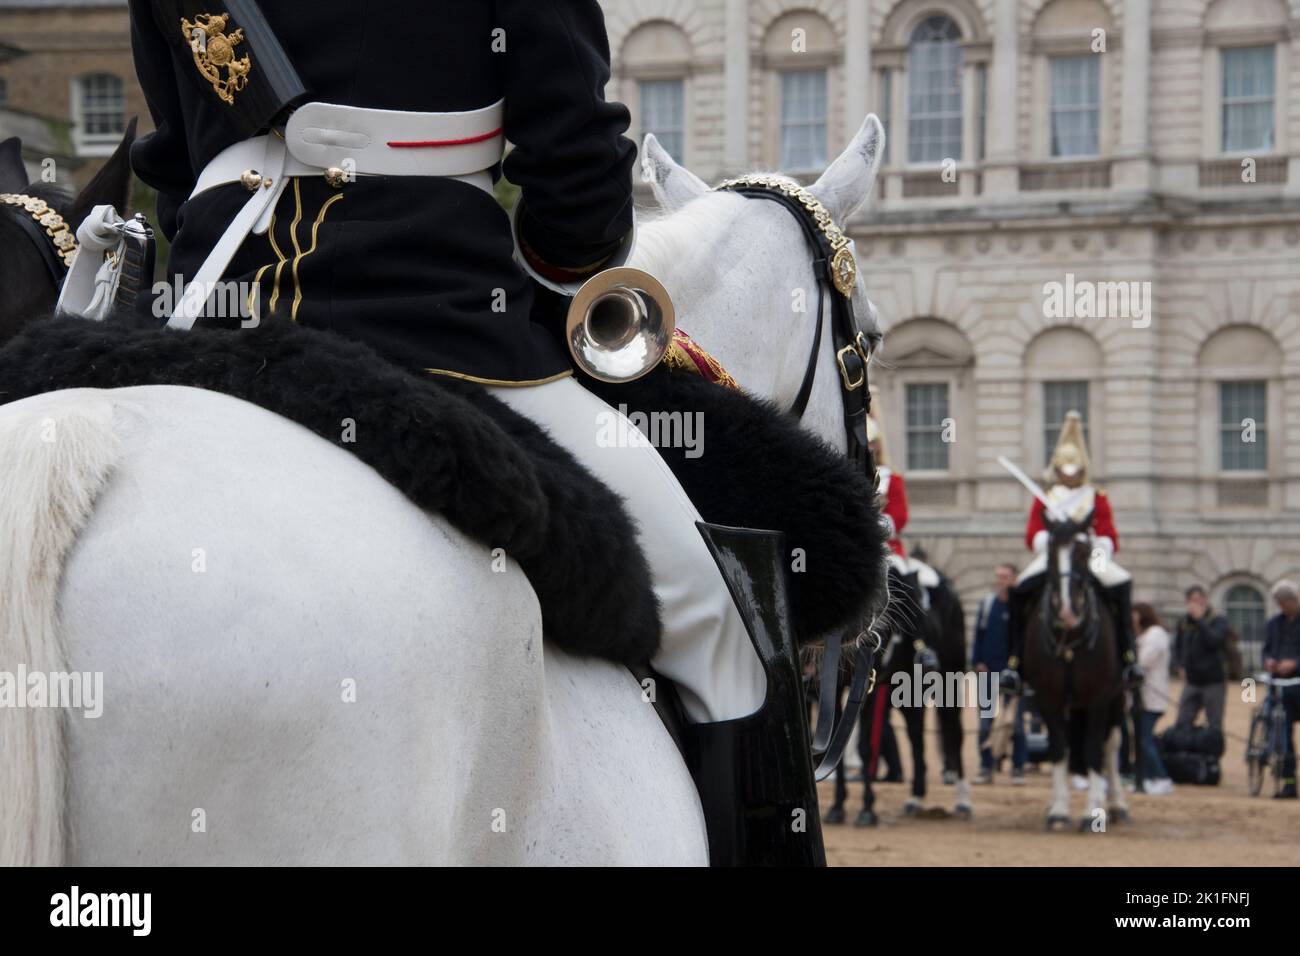 Policemen on horses prepare to for the funerals of the Queen on the 19th October 2022 in London Stock Photo